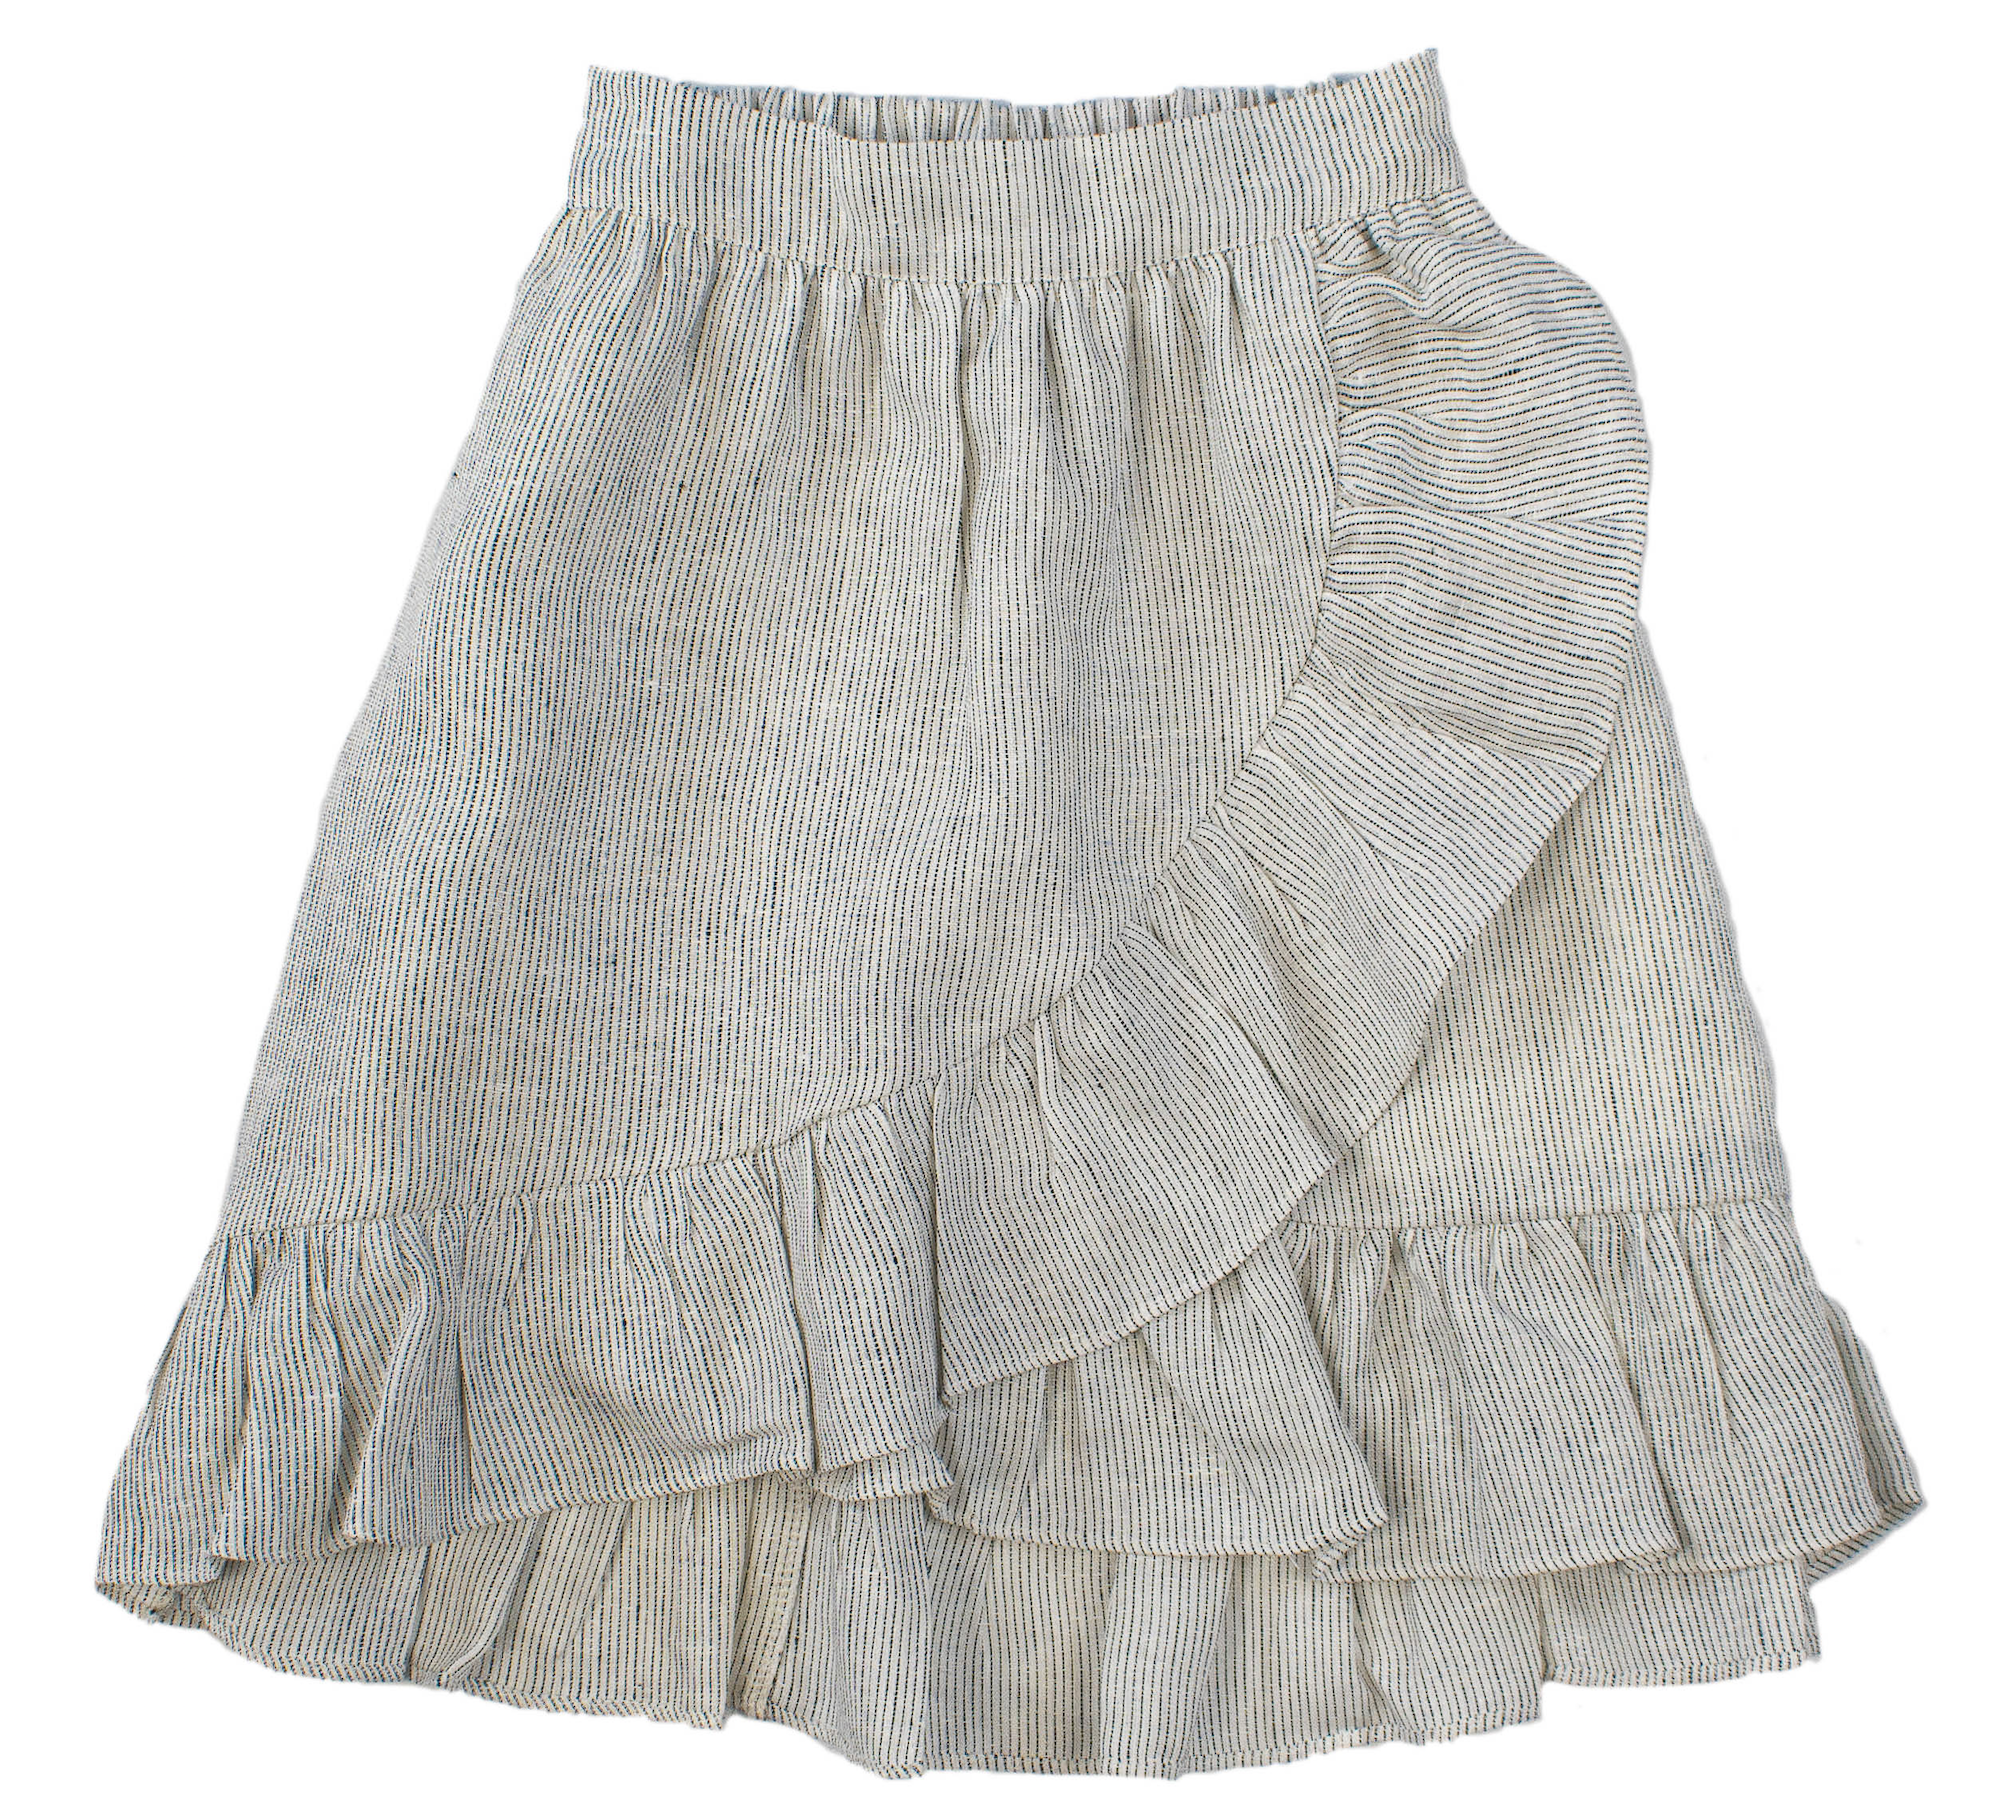                                                                                                                                              Lily Skirt 